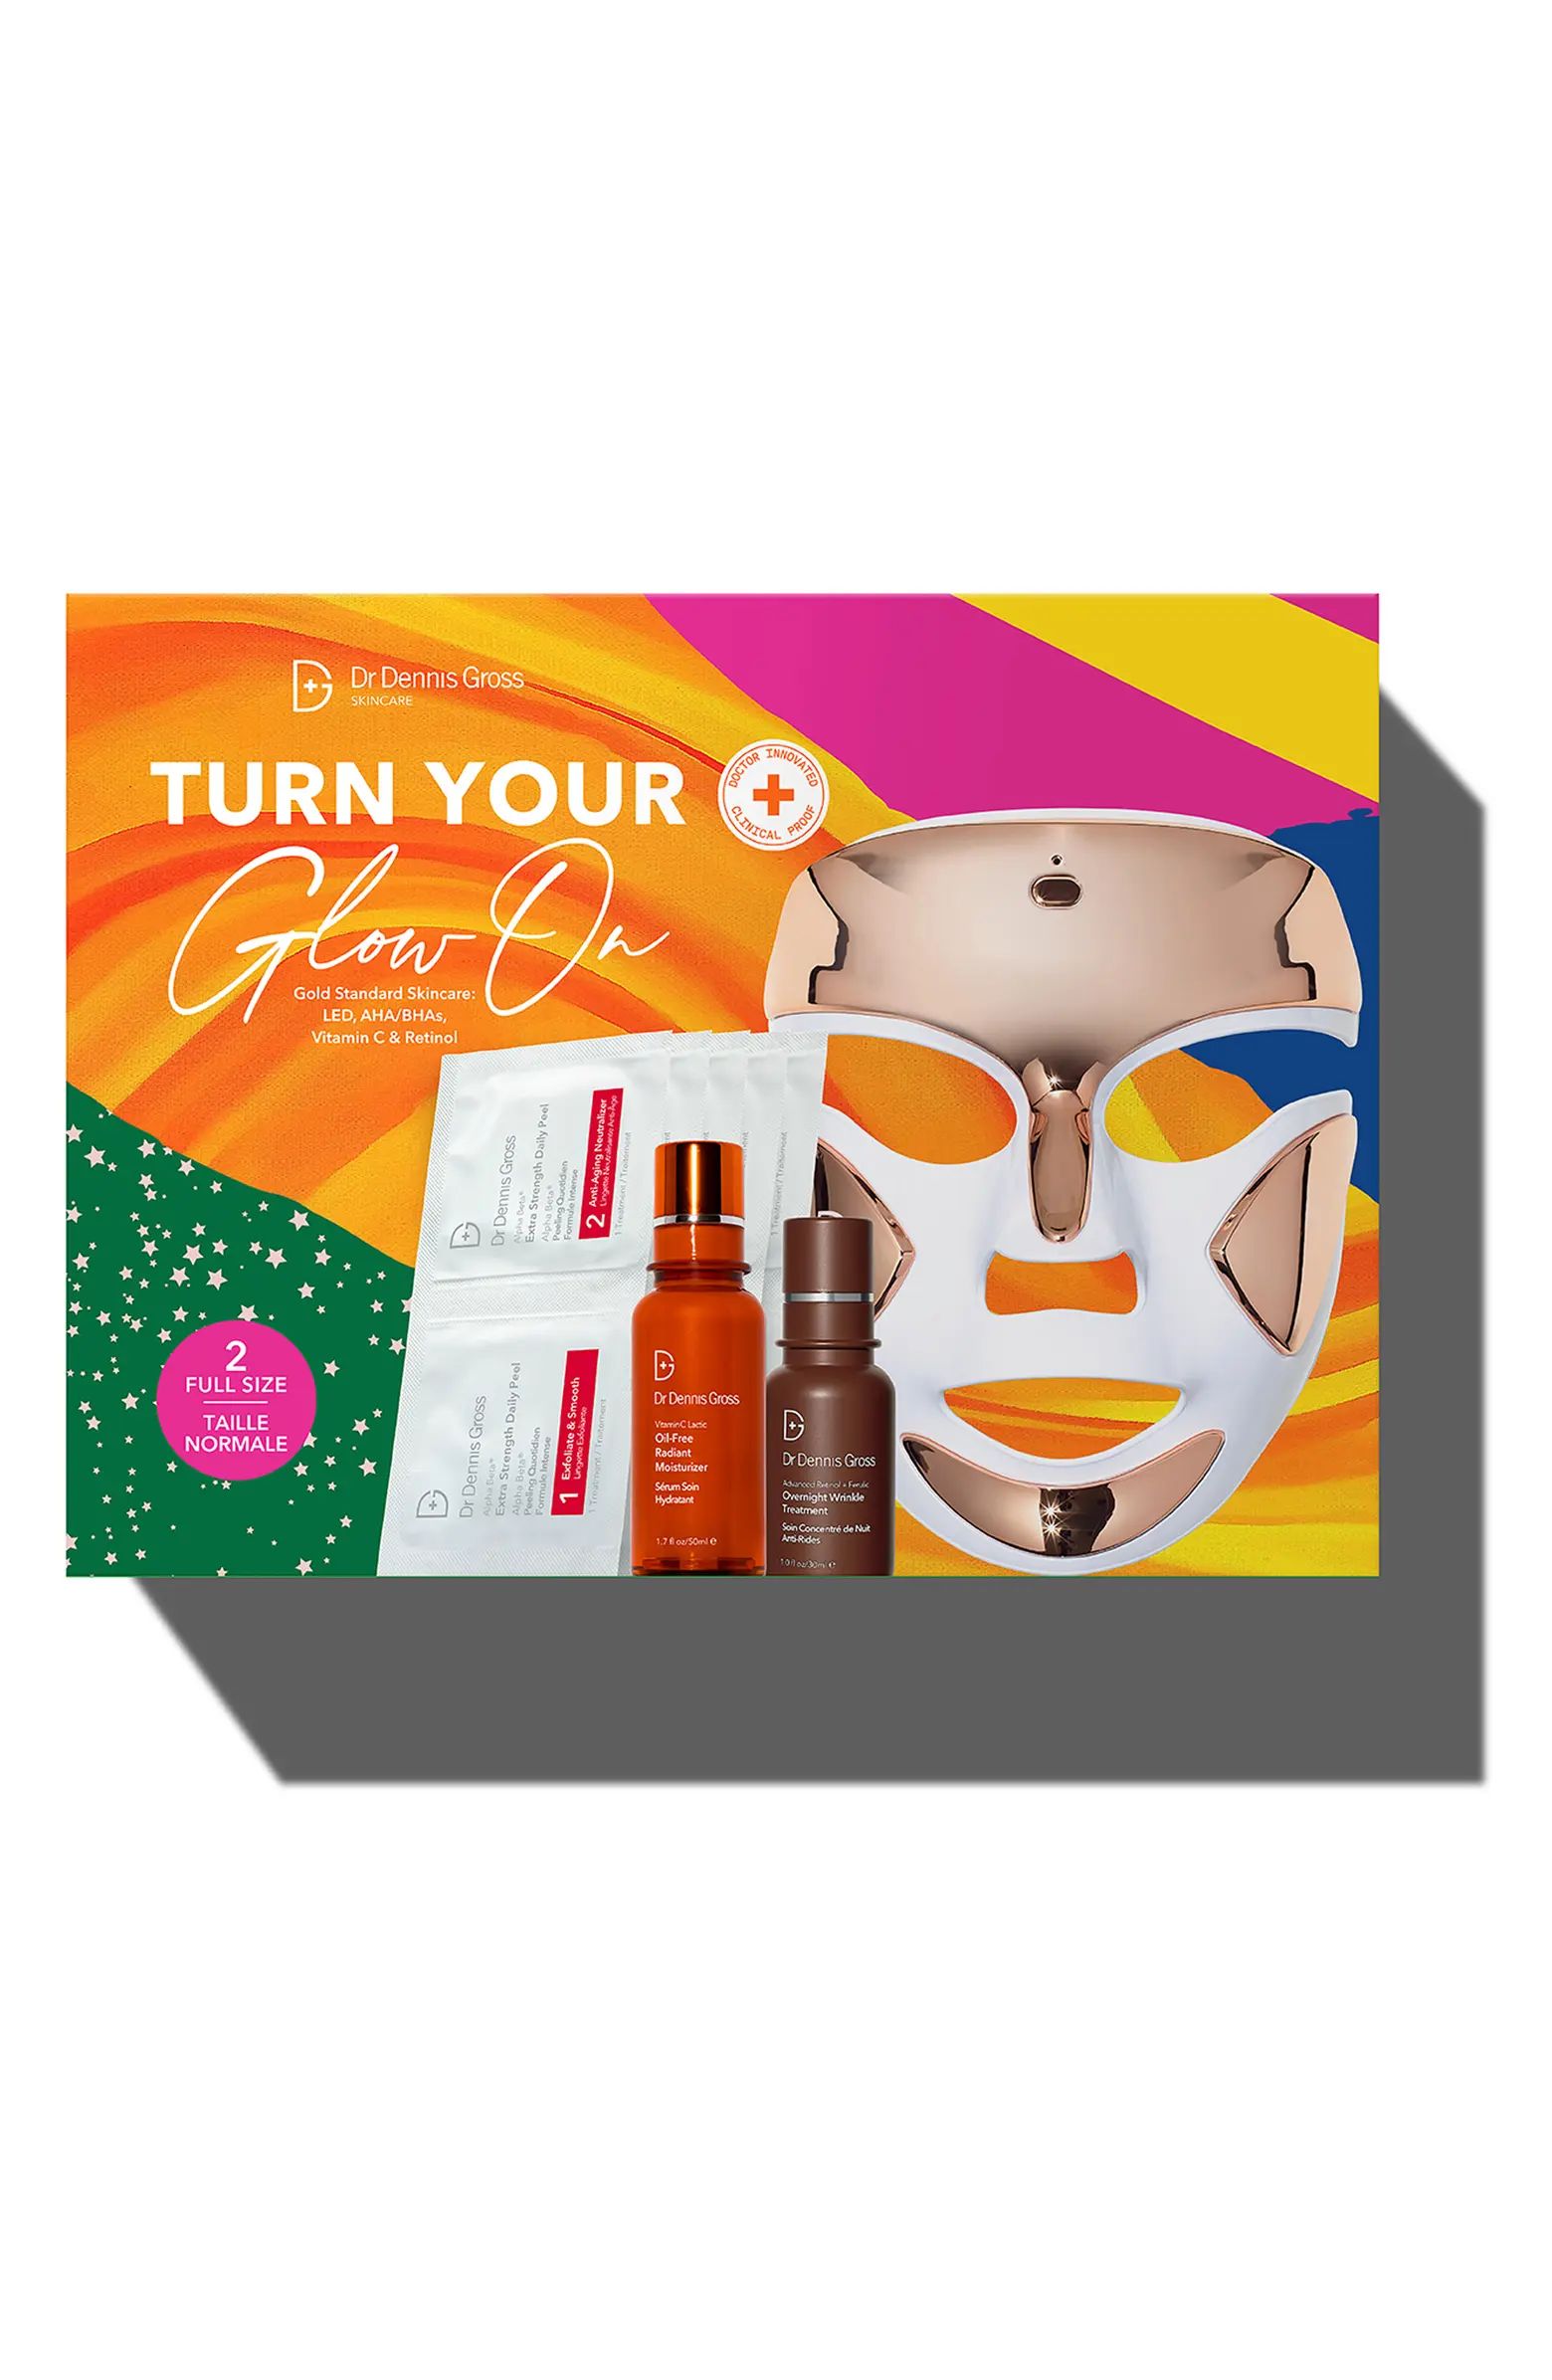 Turn Your Glow On Set $609 Value | Nordstrom